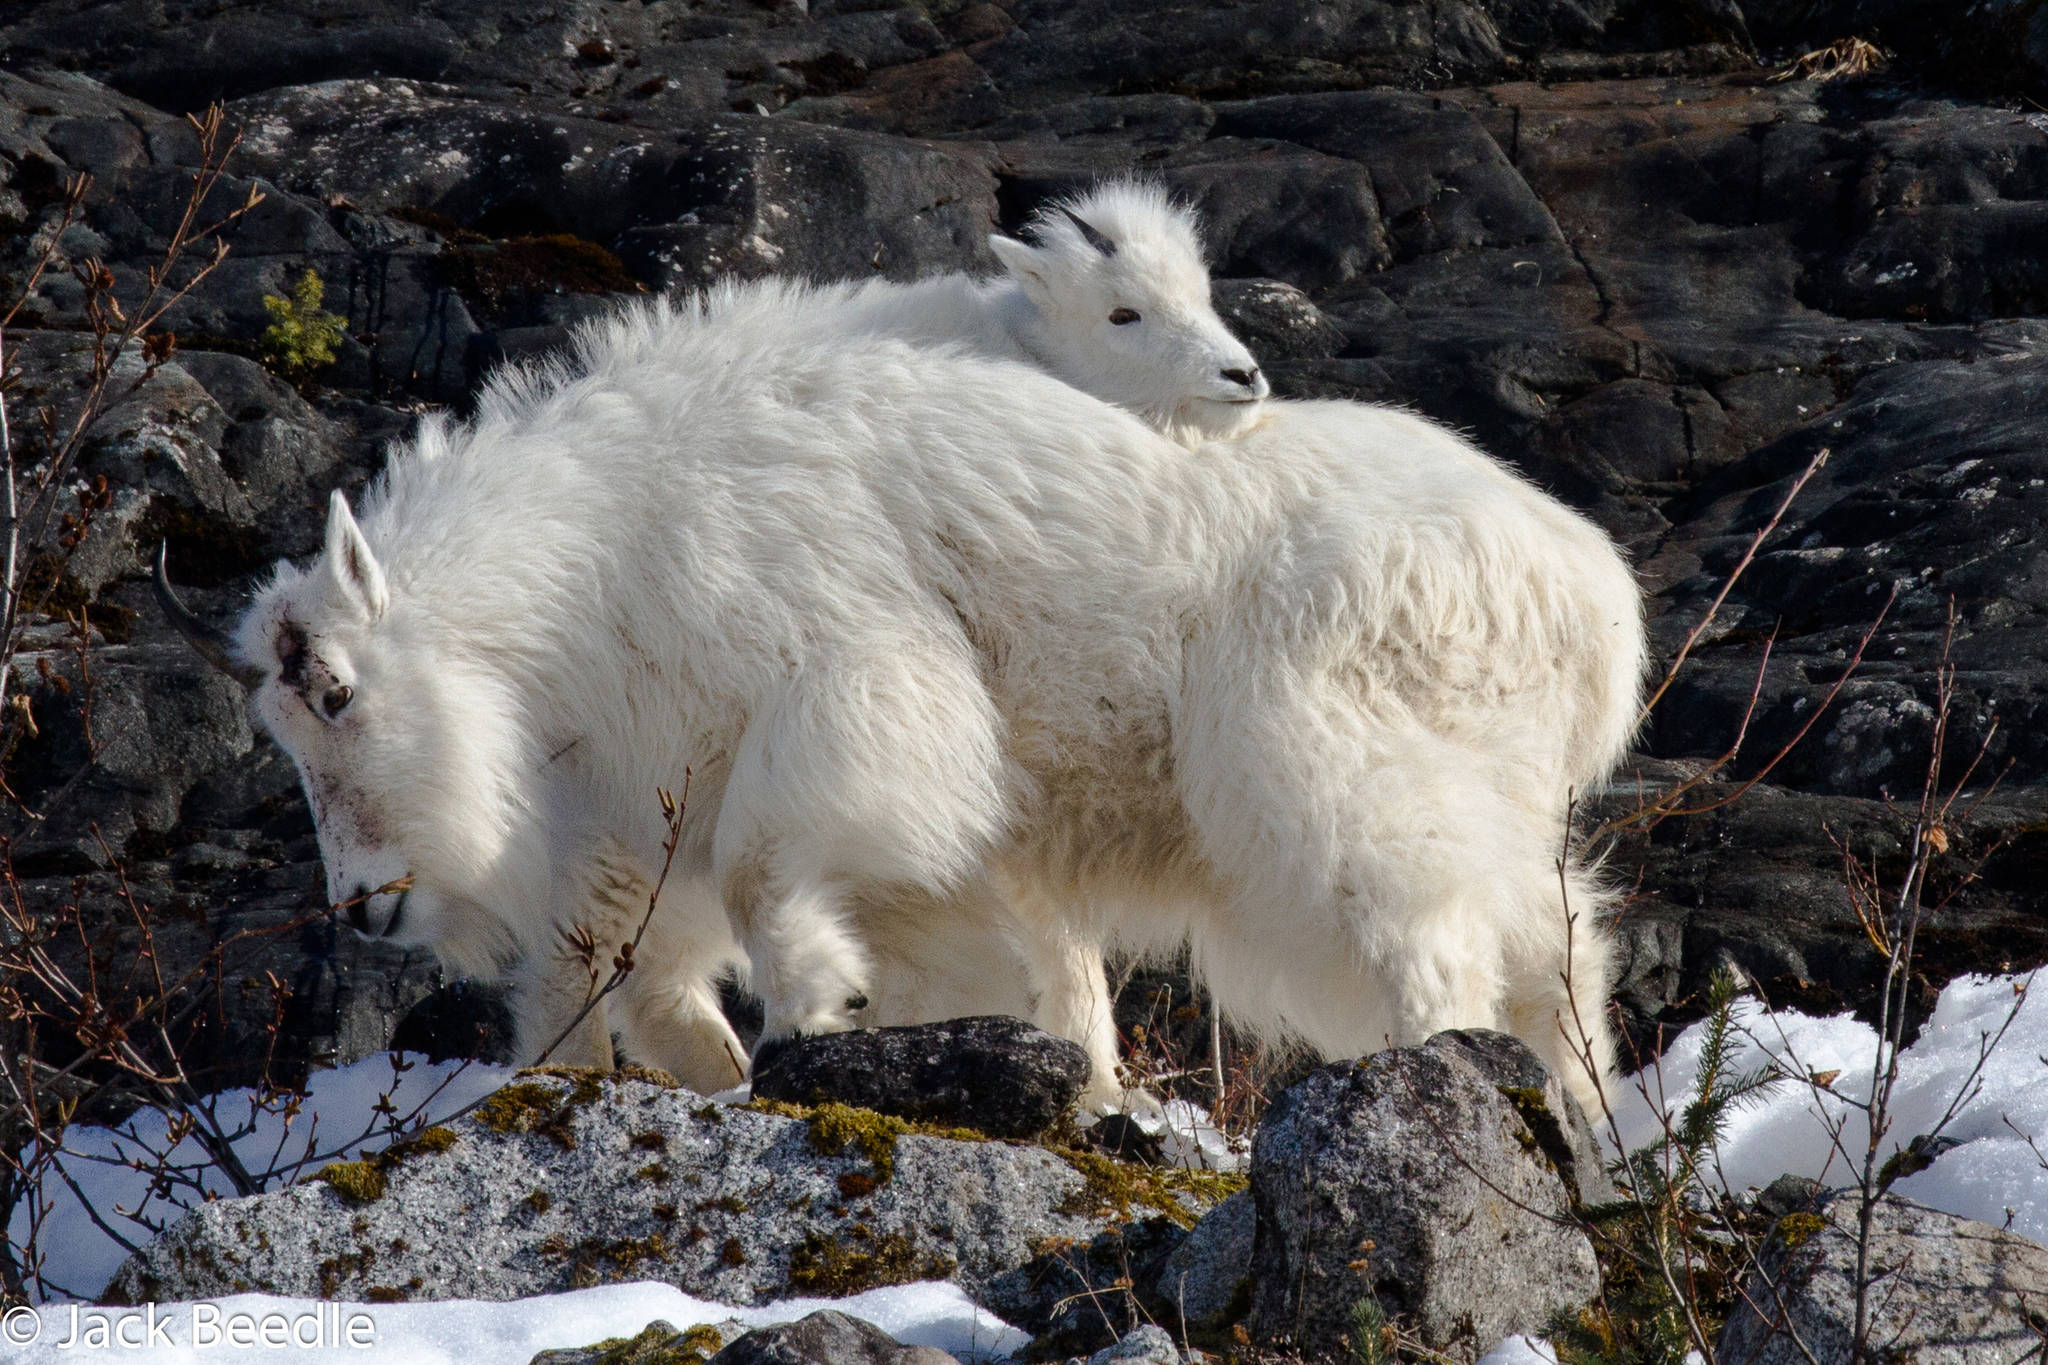 A nanny goat with a broken-off horn gets a back rub from her kid at the Mendenhall Glacier on March 6, 2019. (Courtesy Photo | Jack Beedle)